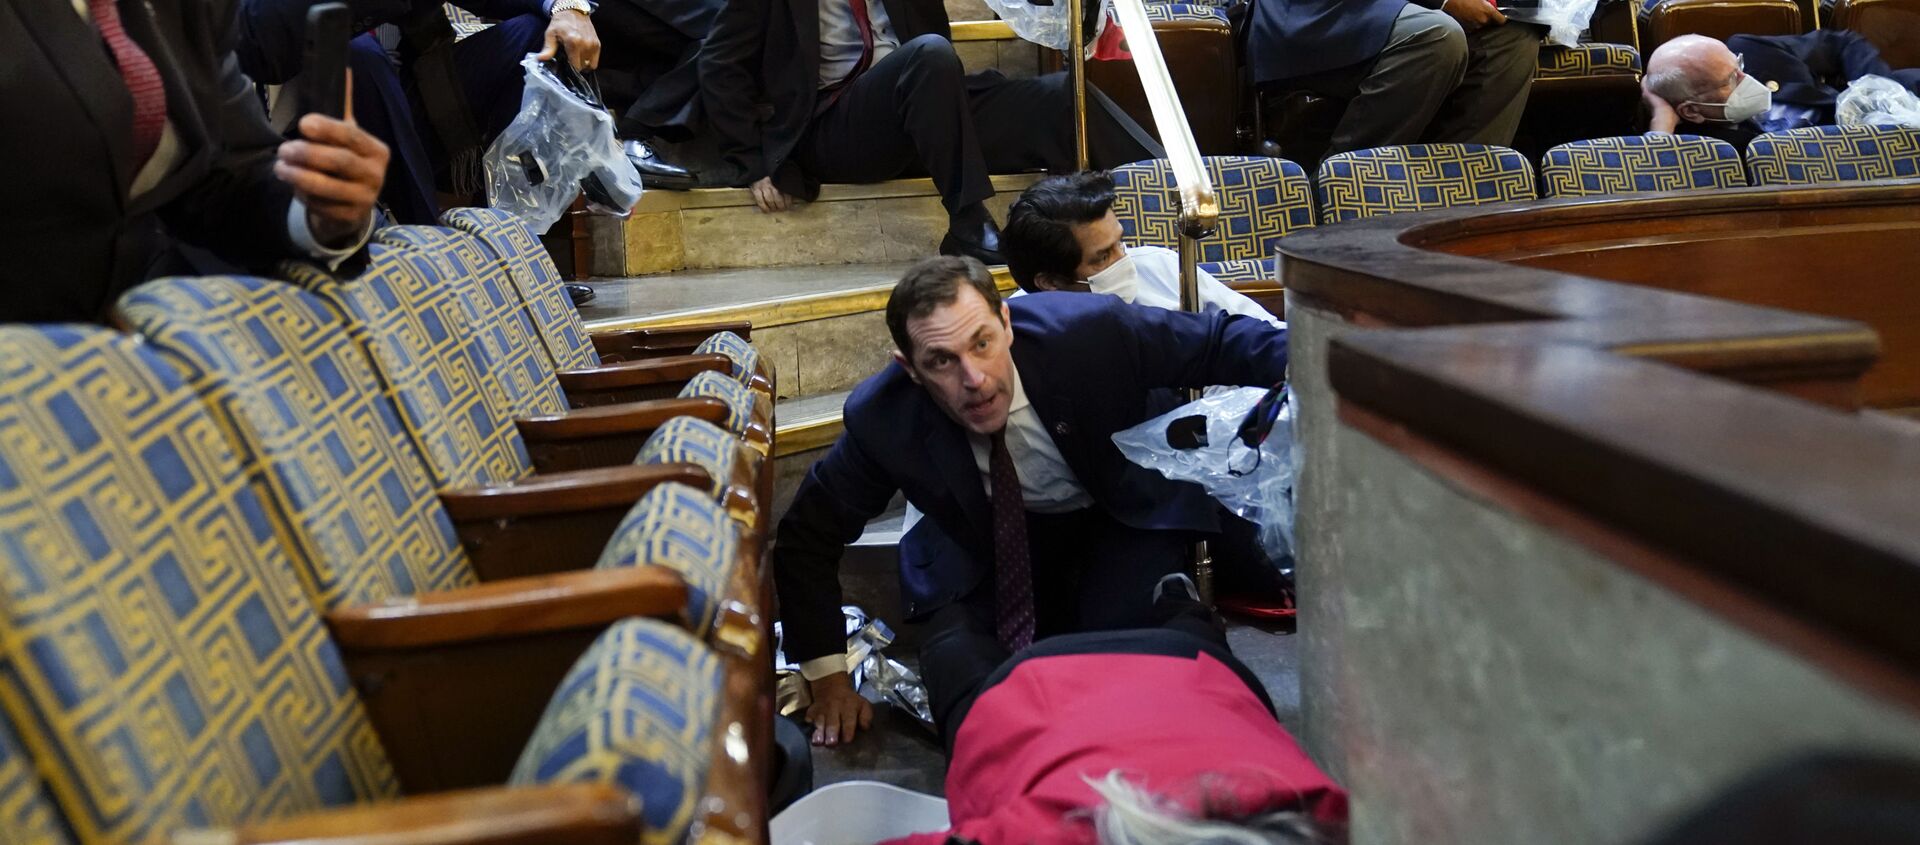 People shelter in the House gallery as protesters try to break into the House Chamber at the U.S. Capitol on Wednesday, Jan. 6, 2021, in Washington. - Sputnik International, 1920, 06.01.2021